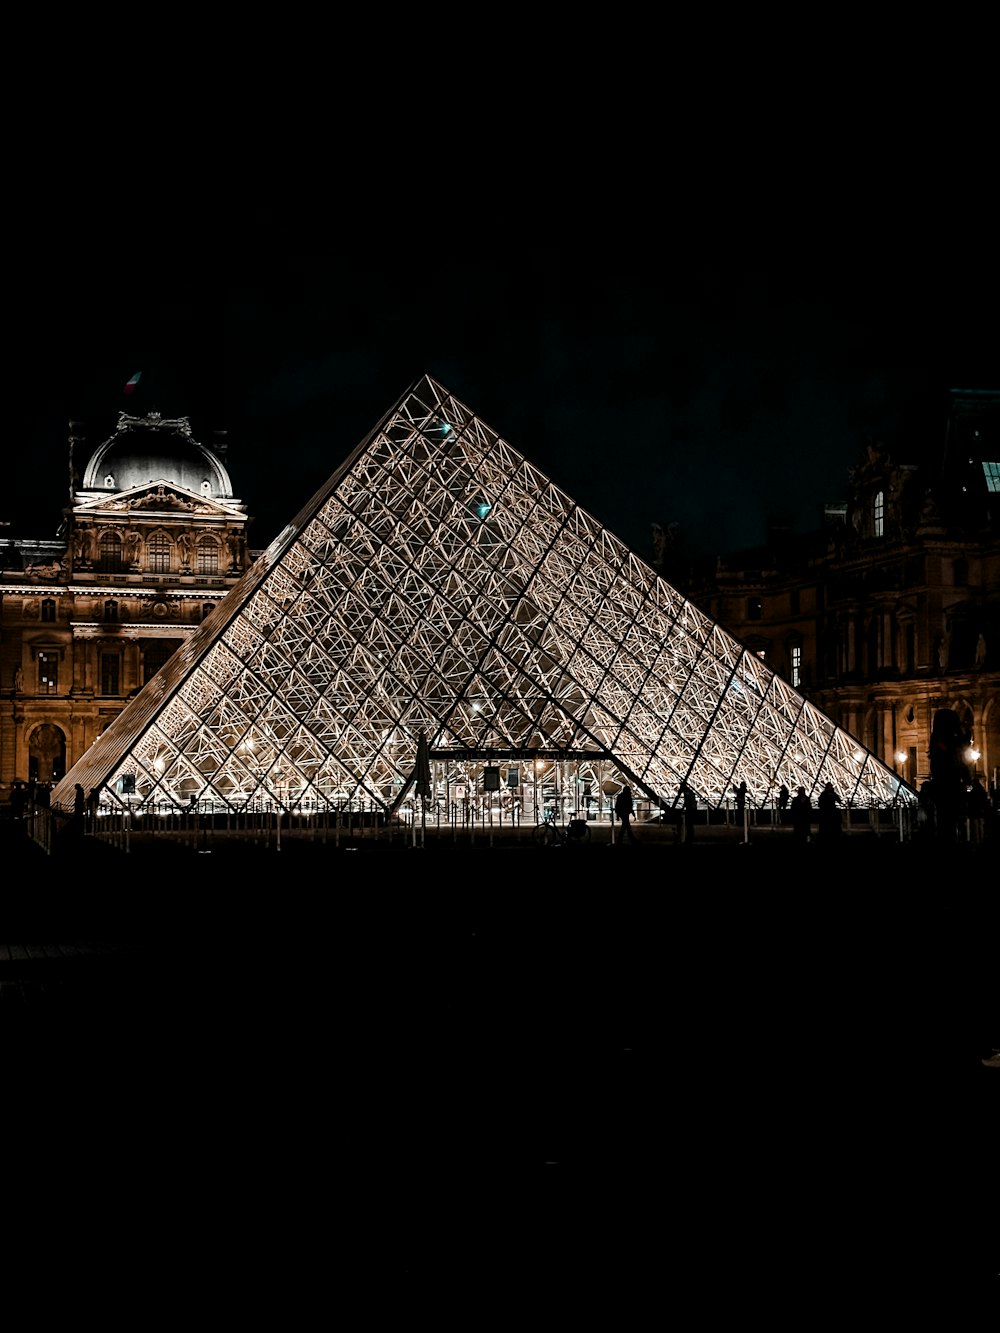 a very tall pyramid lit up at night